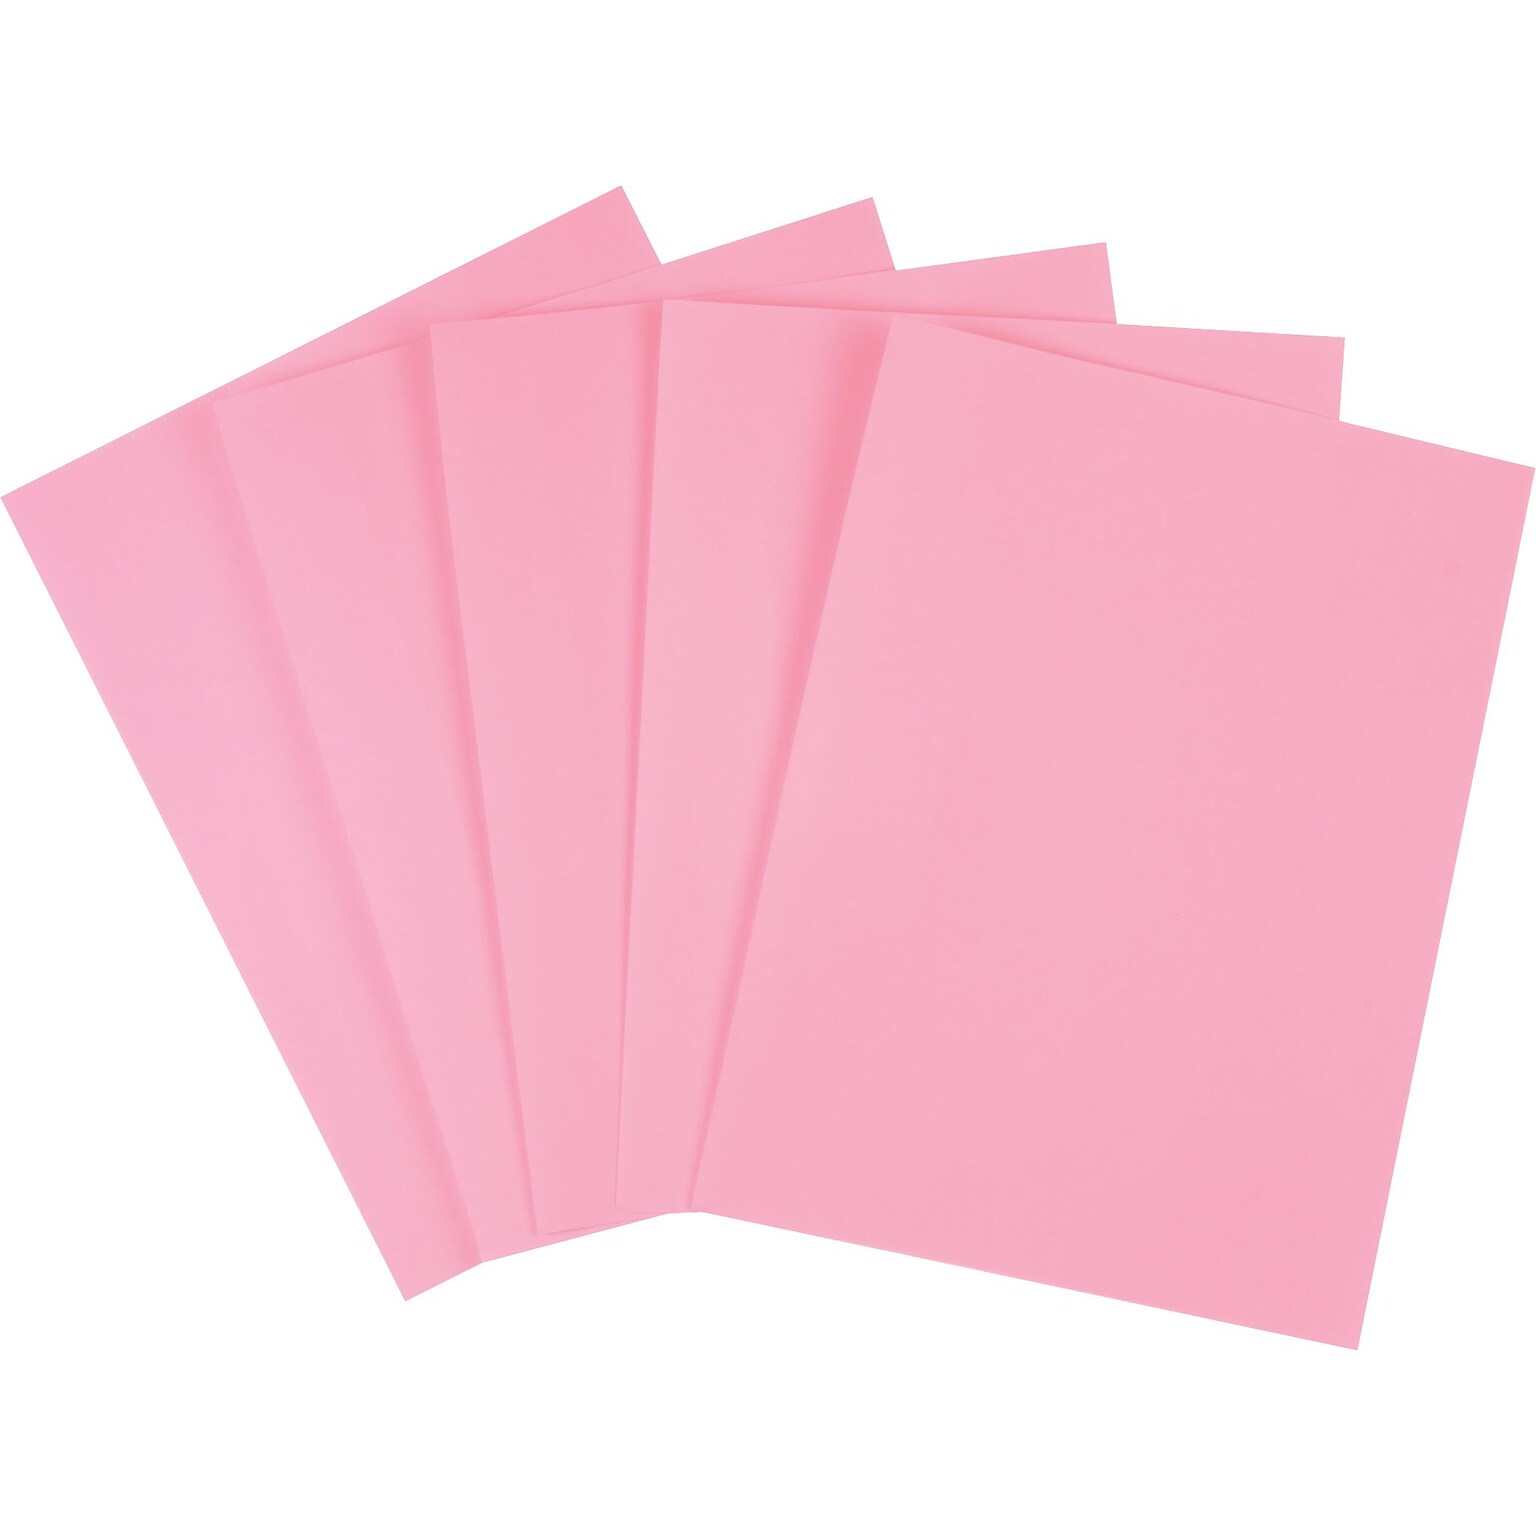 Staples Brights Multipurpose Colored Paper, 20 lbs., 8.5 x 11, Pink, 500/Ream (25207)